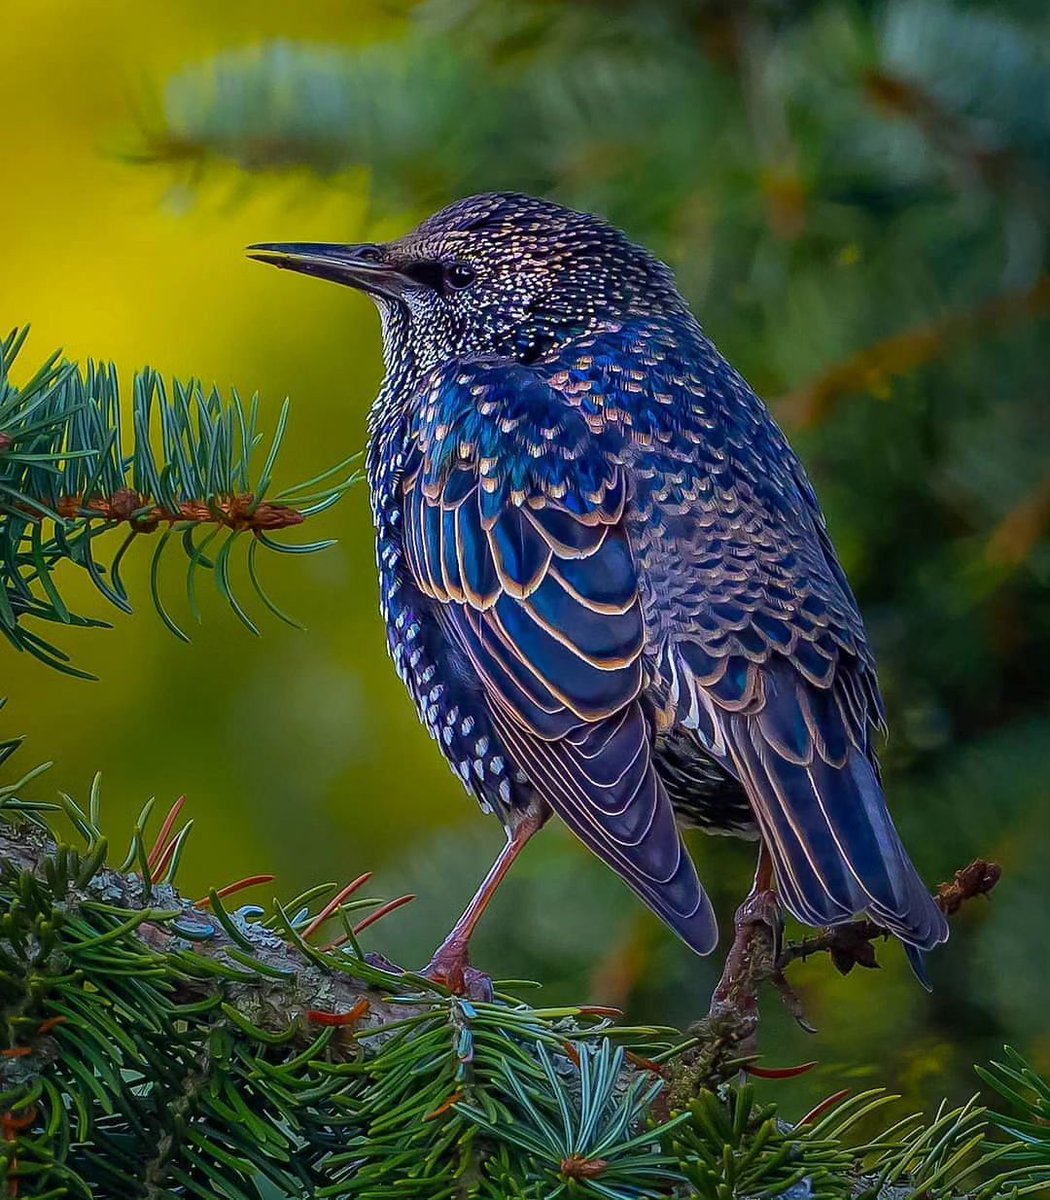 Starling in its autumn plumage 💙